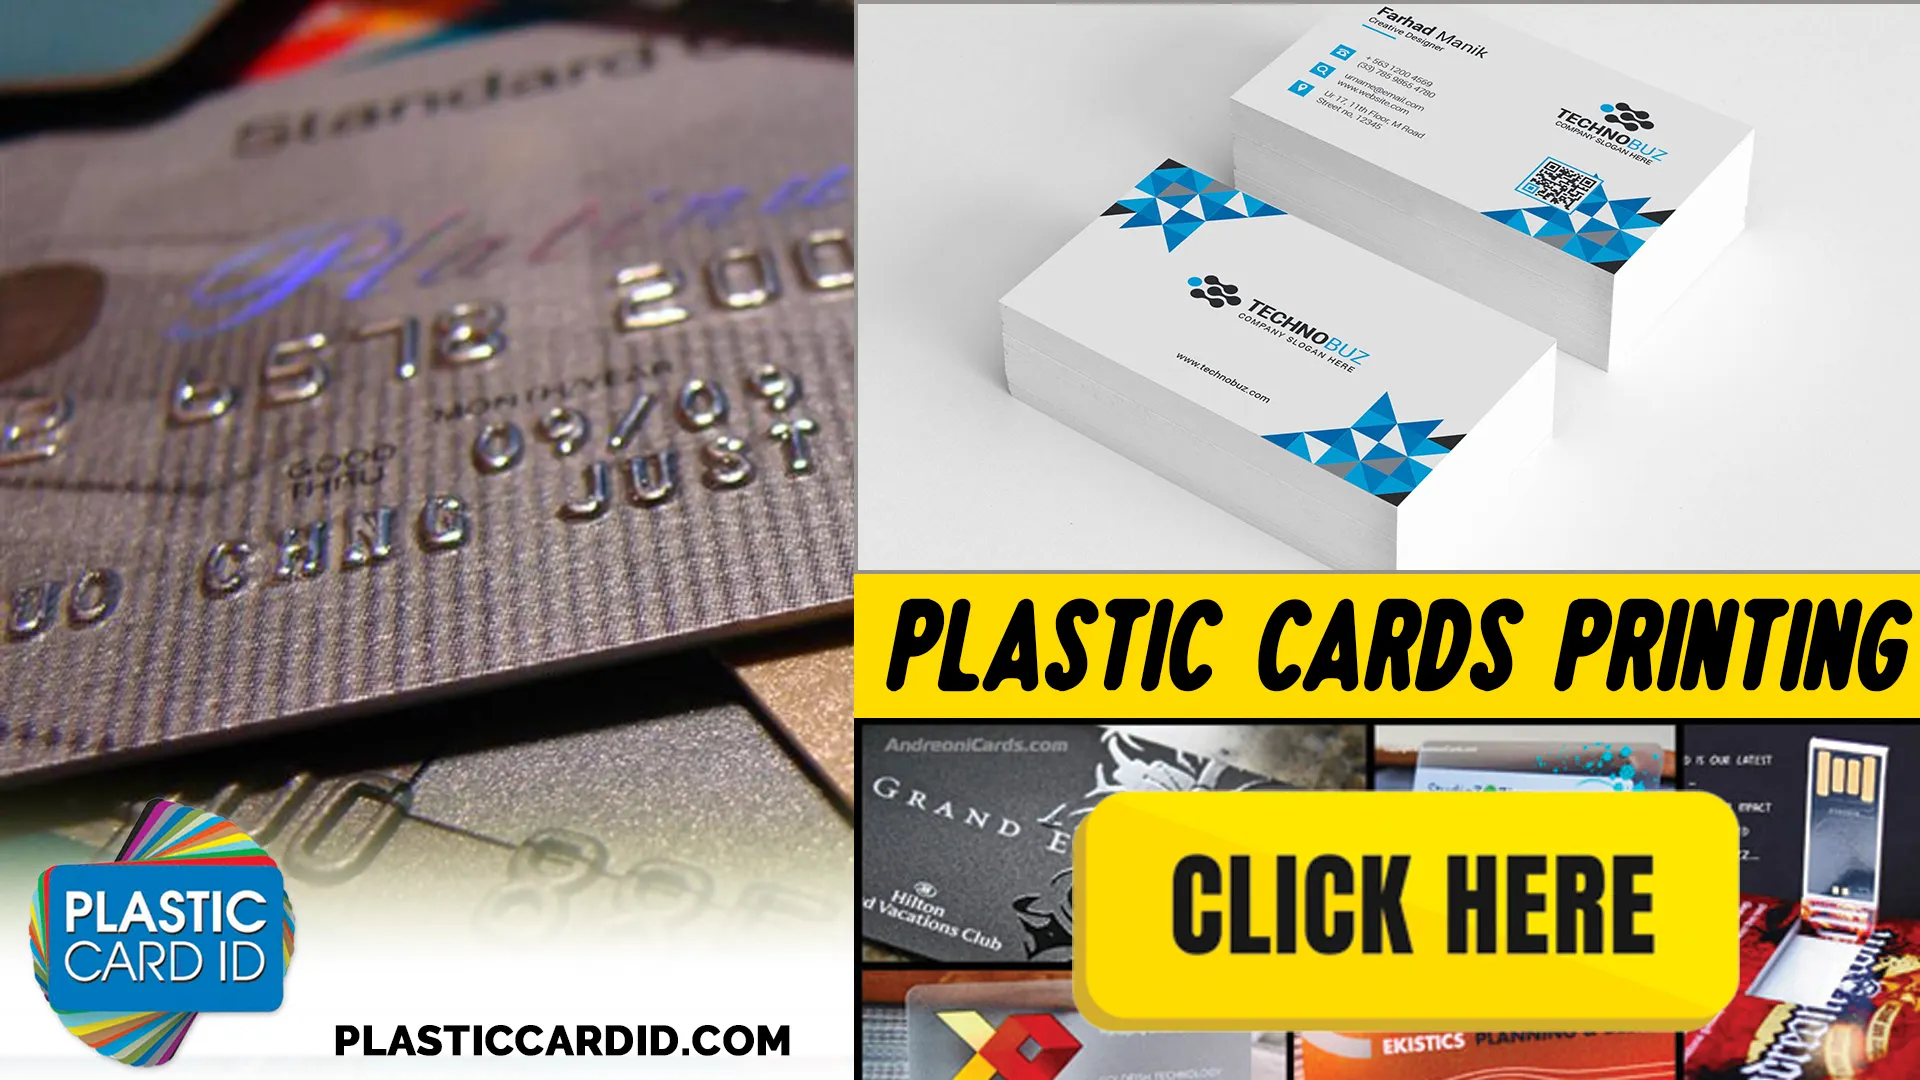 The Benefits of Partnering with Plastic Card ID
